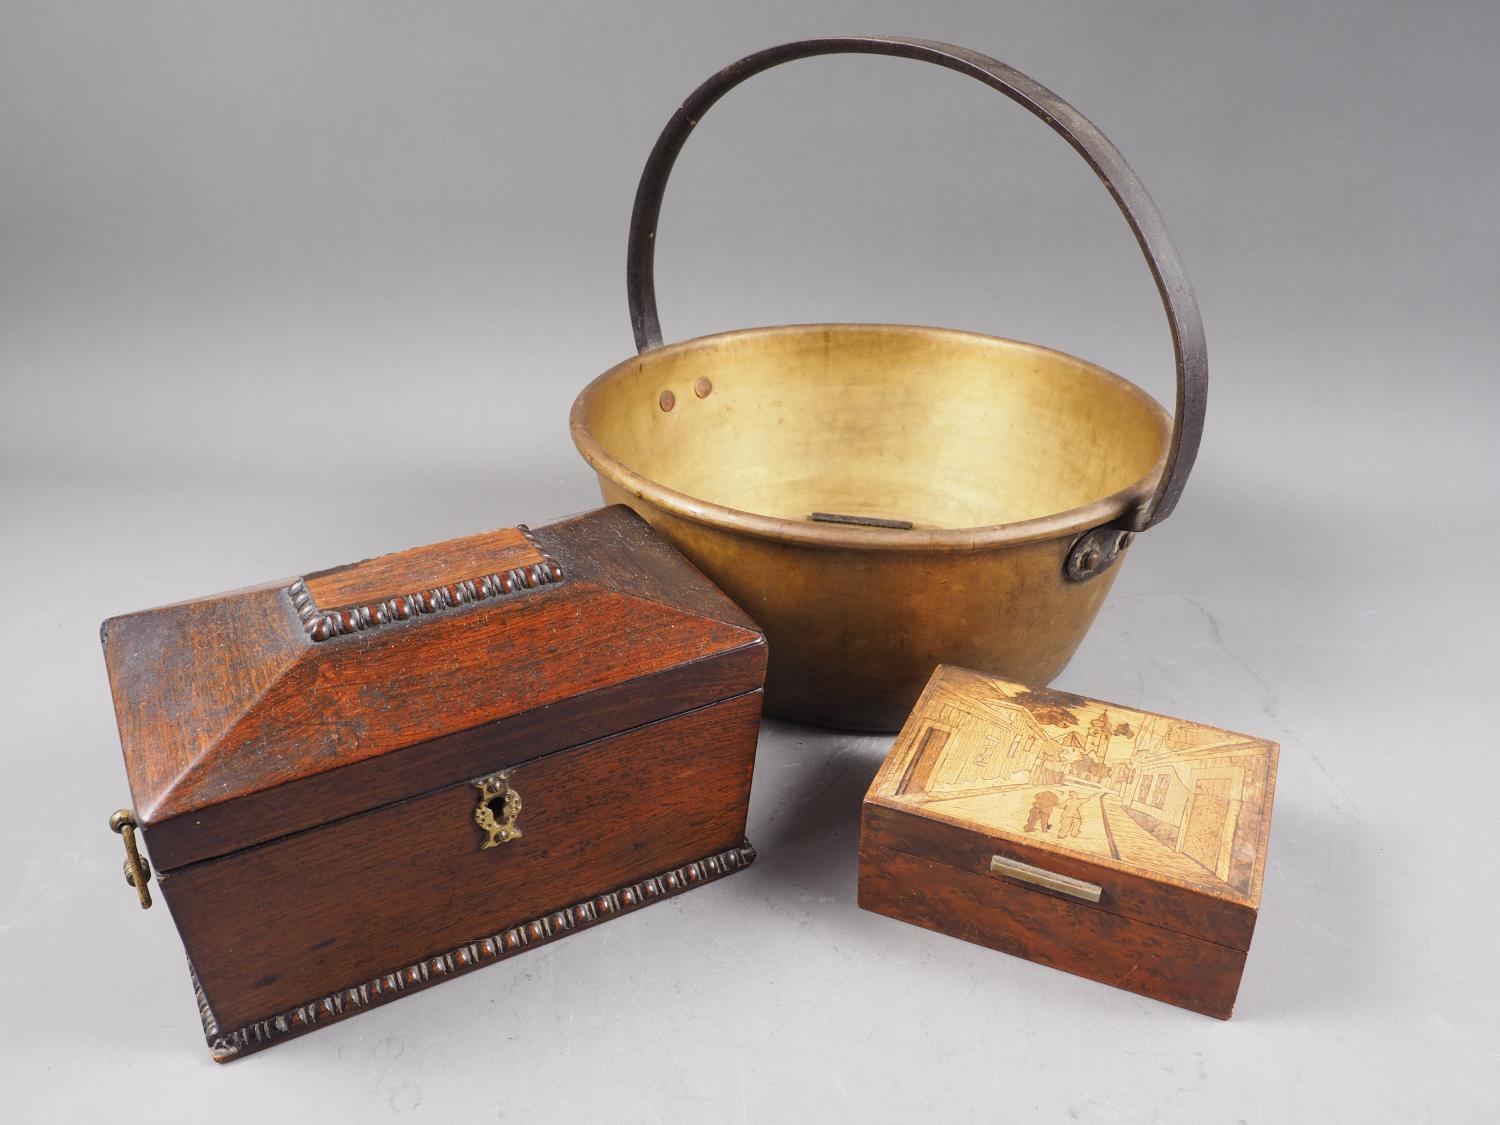 A 19th century rosewood tea caddy, 8" wide, a marquetry cigarette box and a 19th century brass